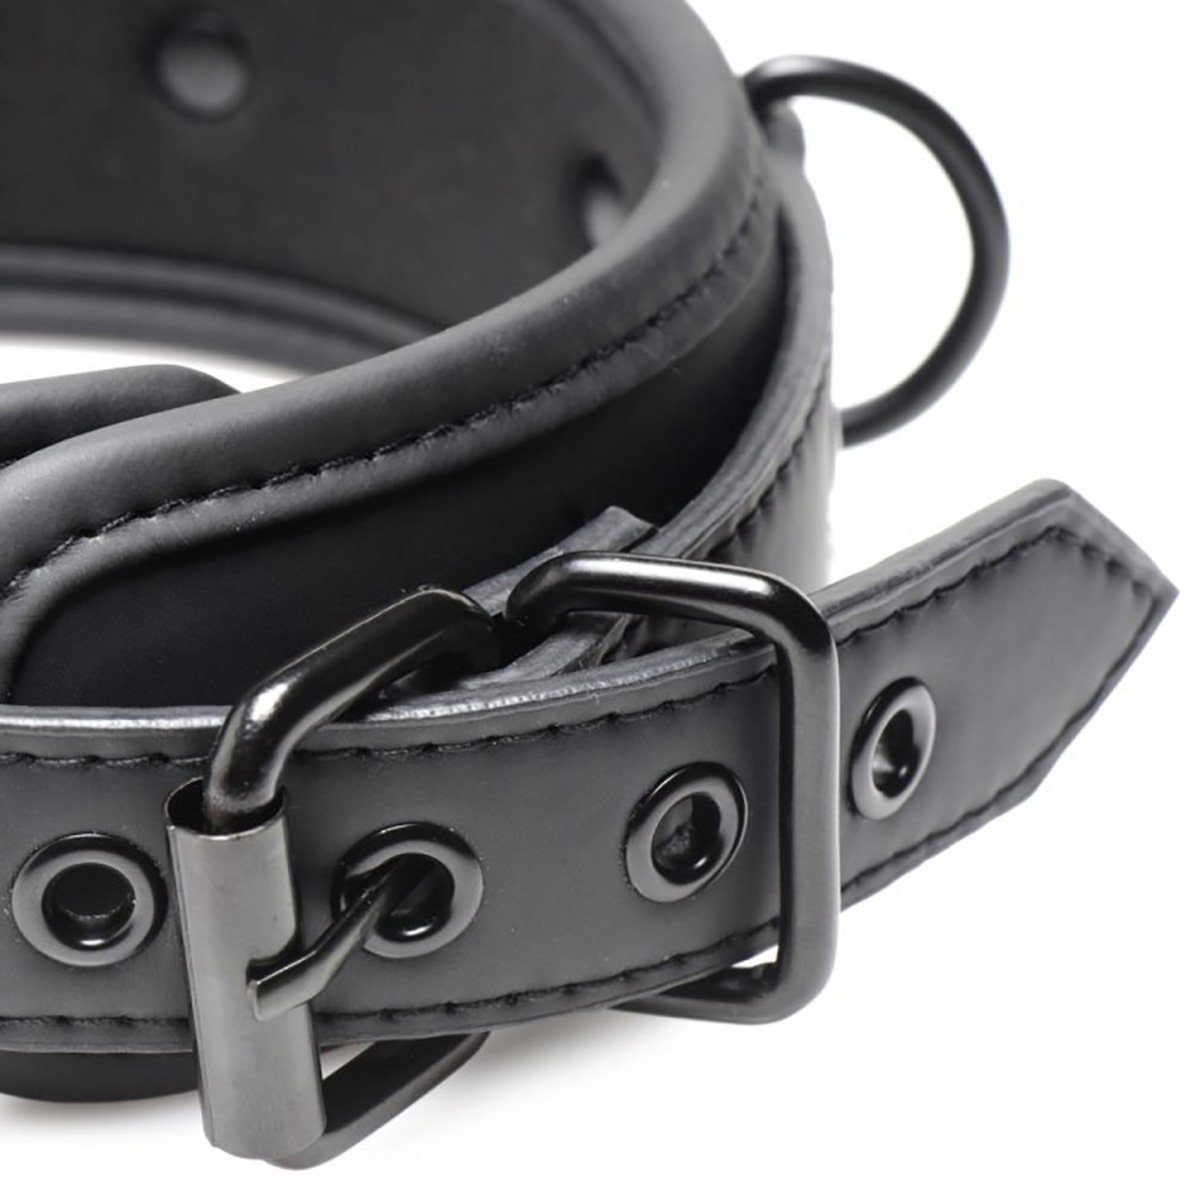 Series Temptress with Collared Nipple Bondage-Set Master Collar gepolstert Clamps,